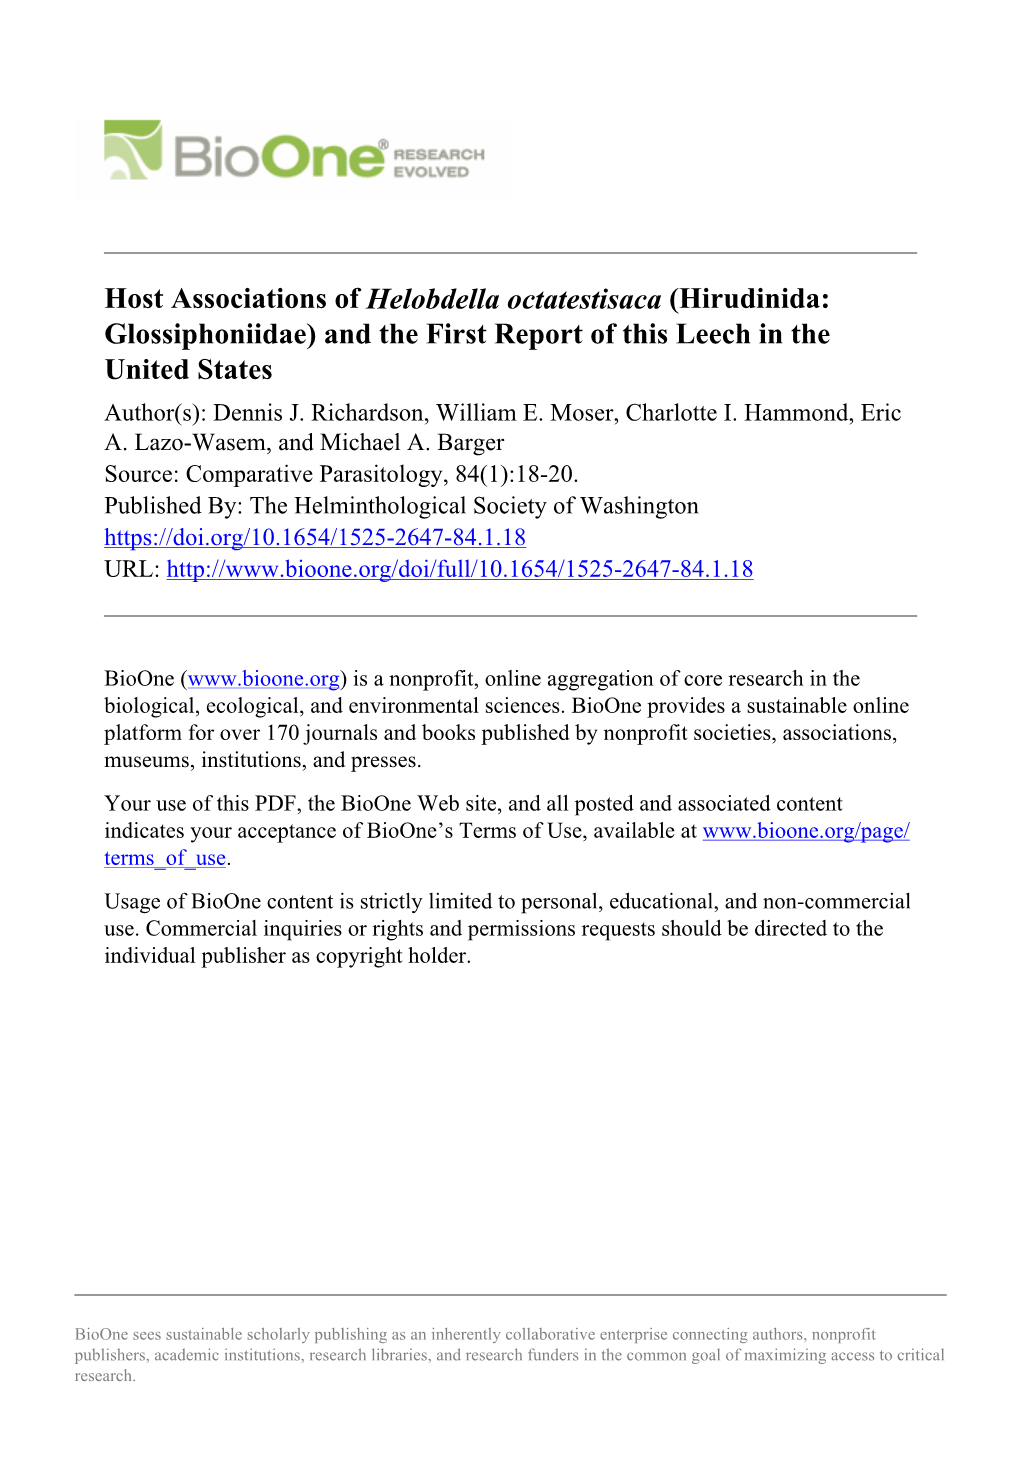 Host Associations of Helobdella Octatestisaca (Hirudinida: Glossiphoniidae) and the First Report of This Leech in the United States Author(S): Dennis J